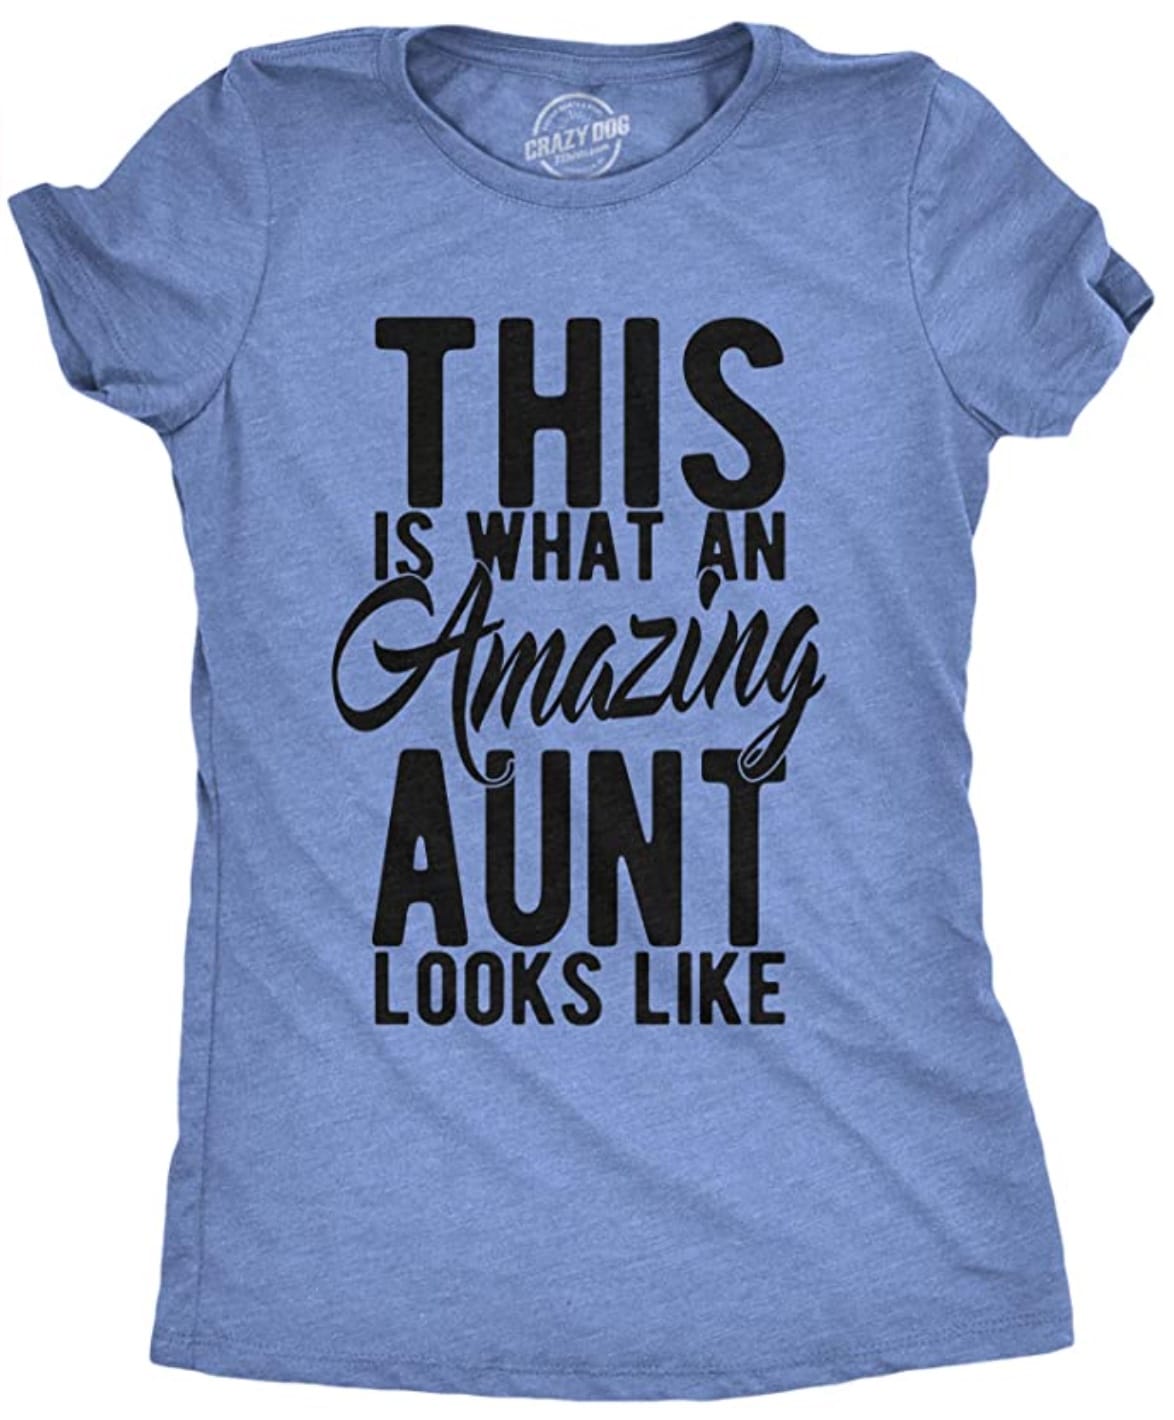 This is What an Amazing Aunt Looks Like T-Shirt